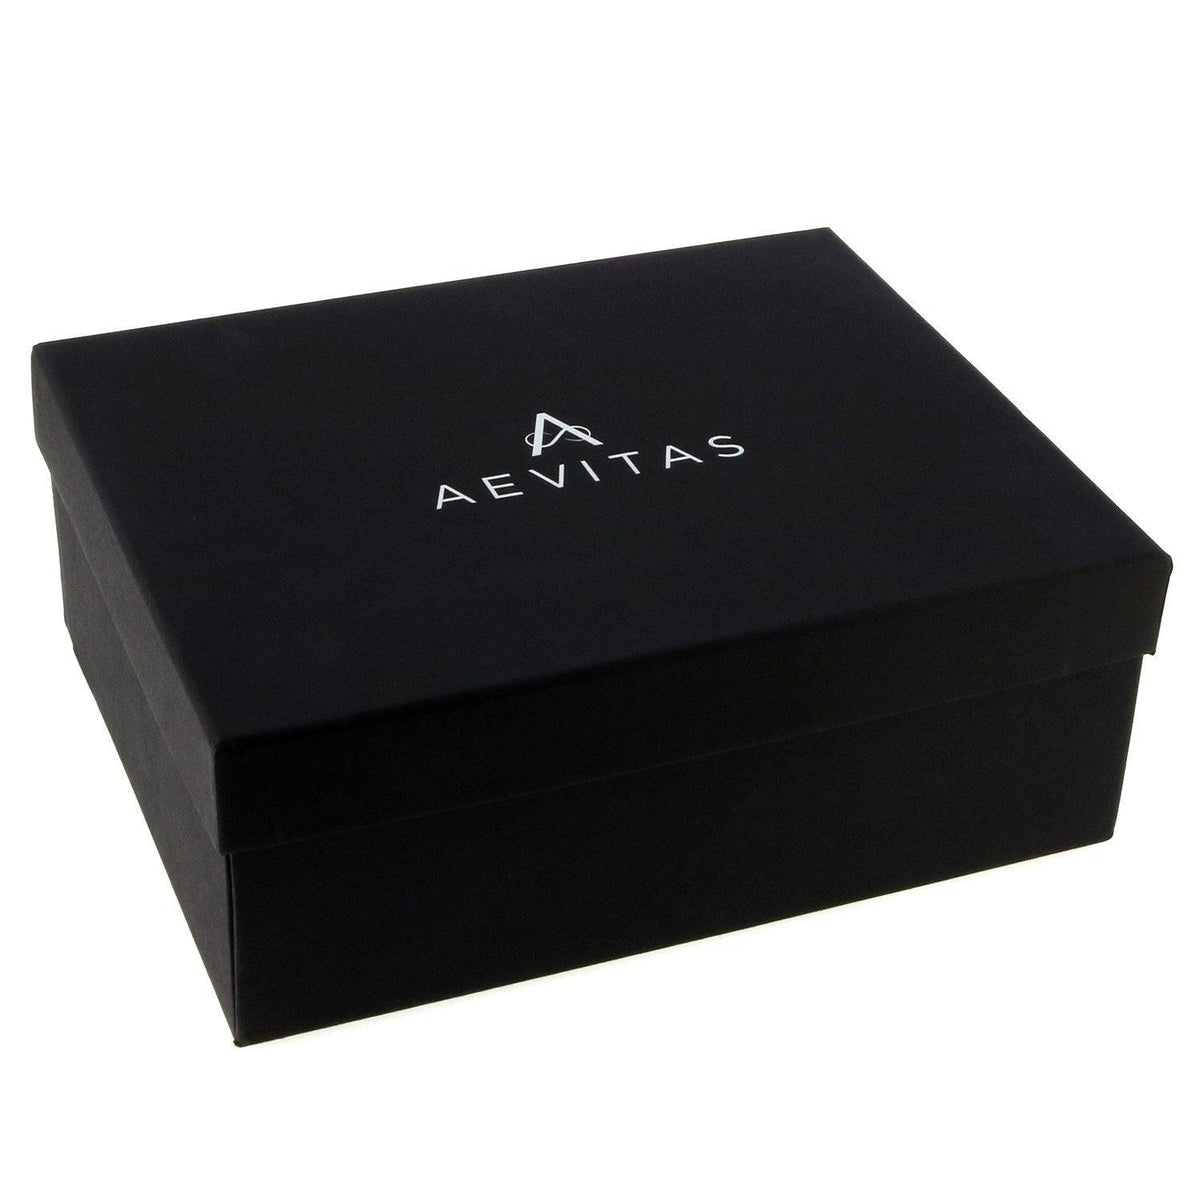 Black Genuine Leather Watch Collectors Box for 8 Wrist Watches Royal Blue Velvet Lining by Aevitas